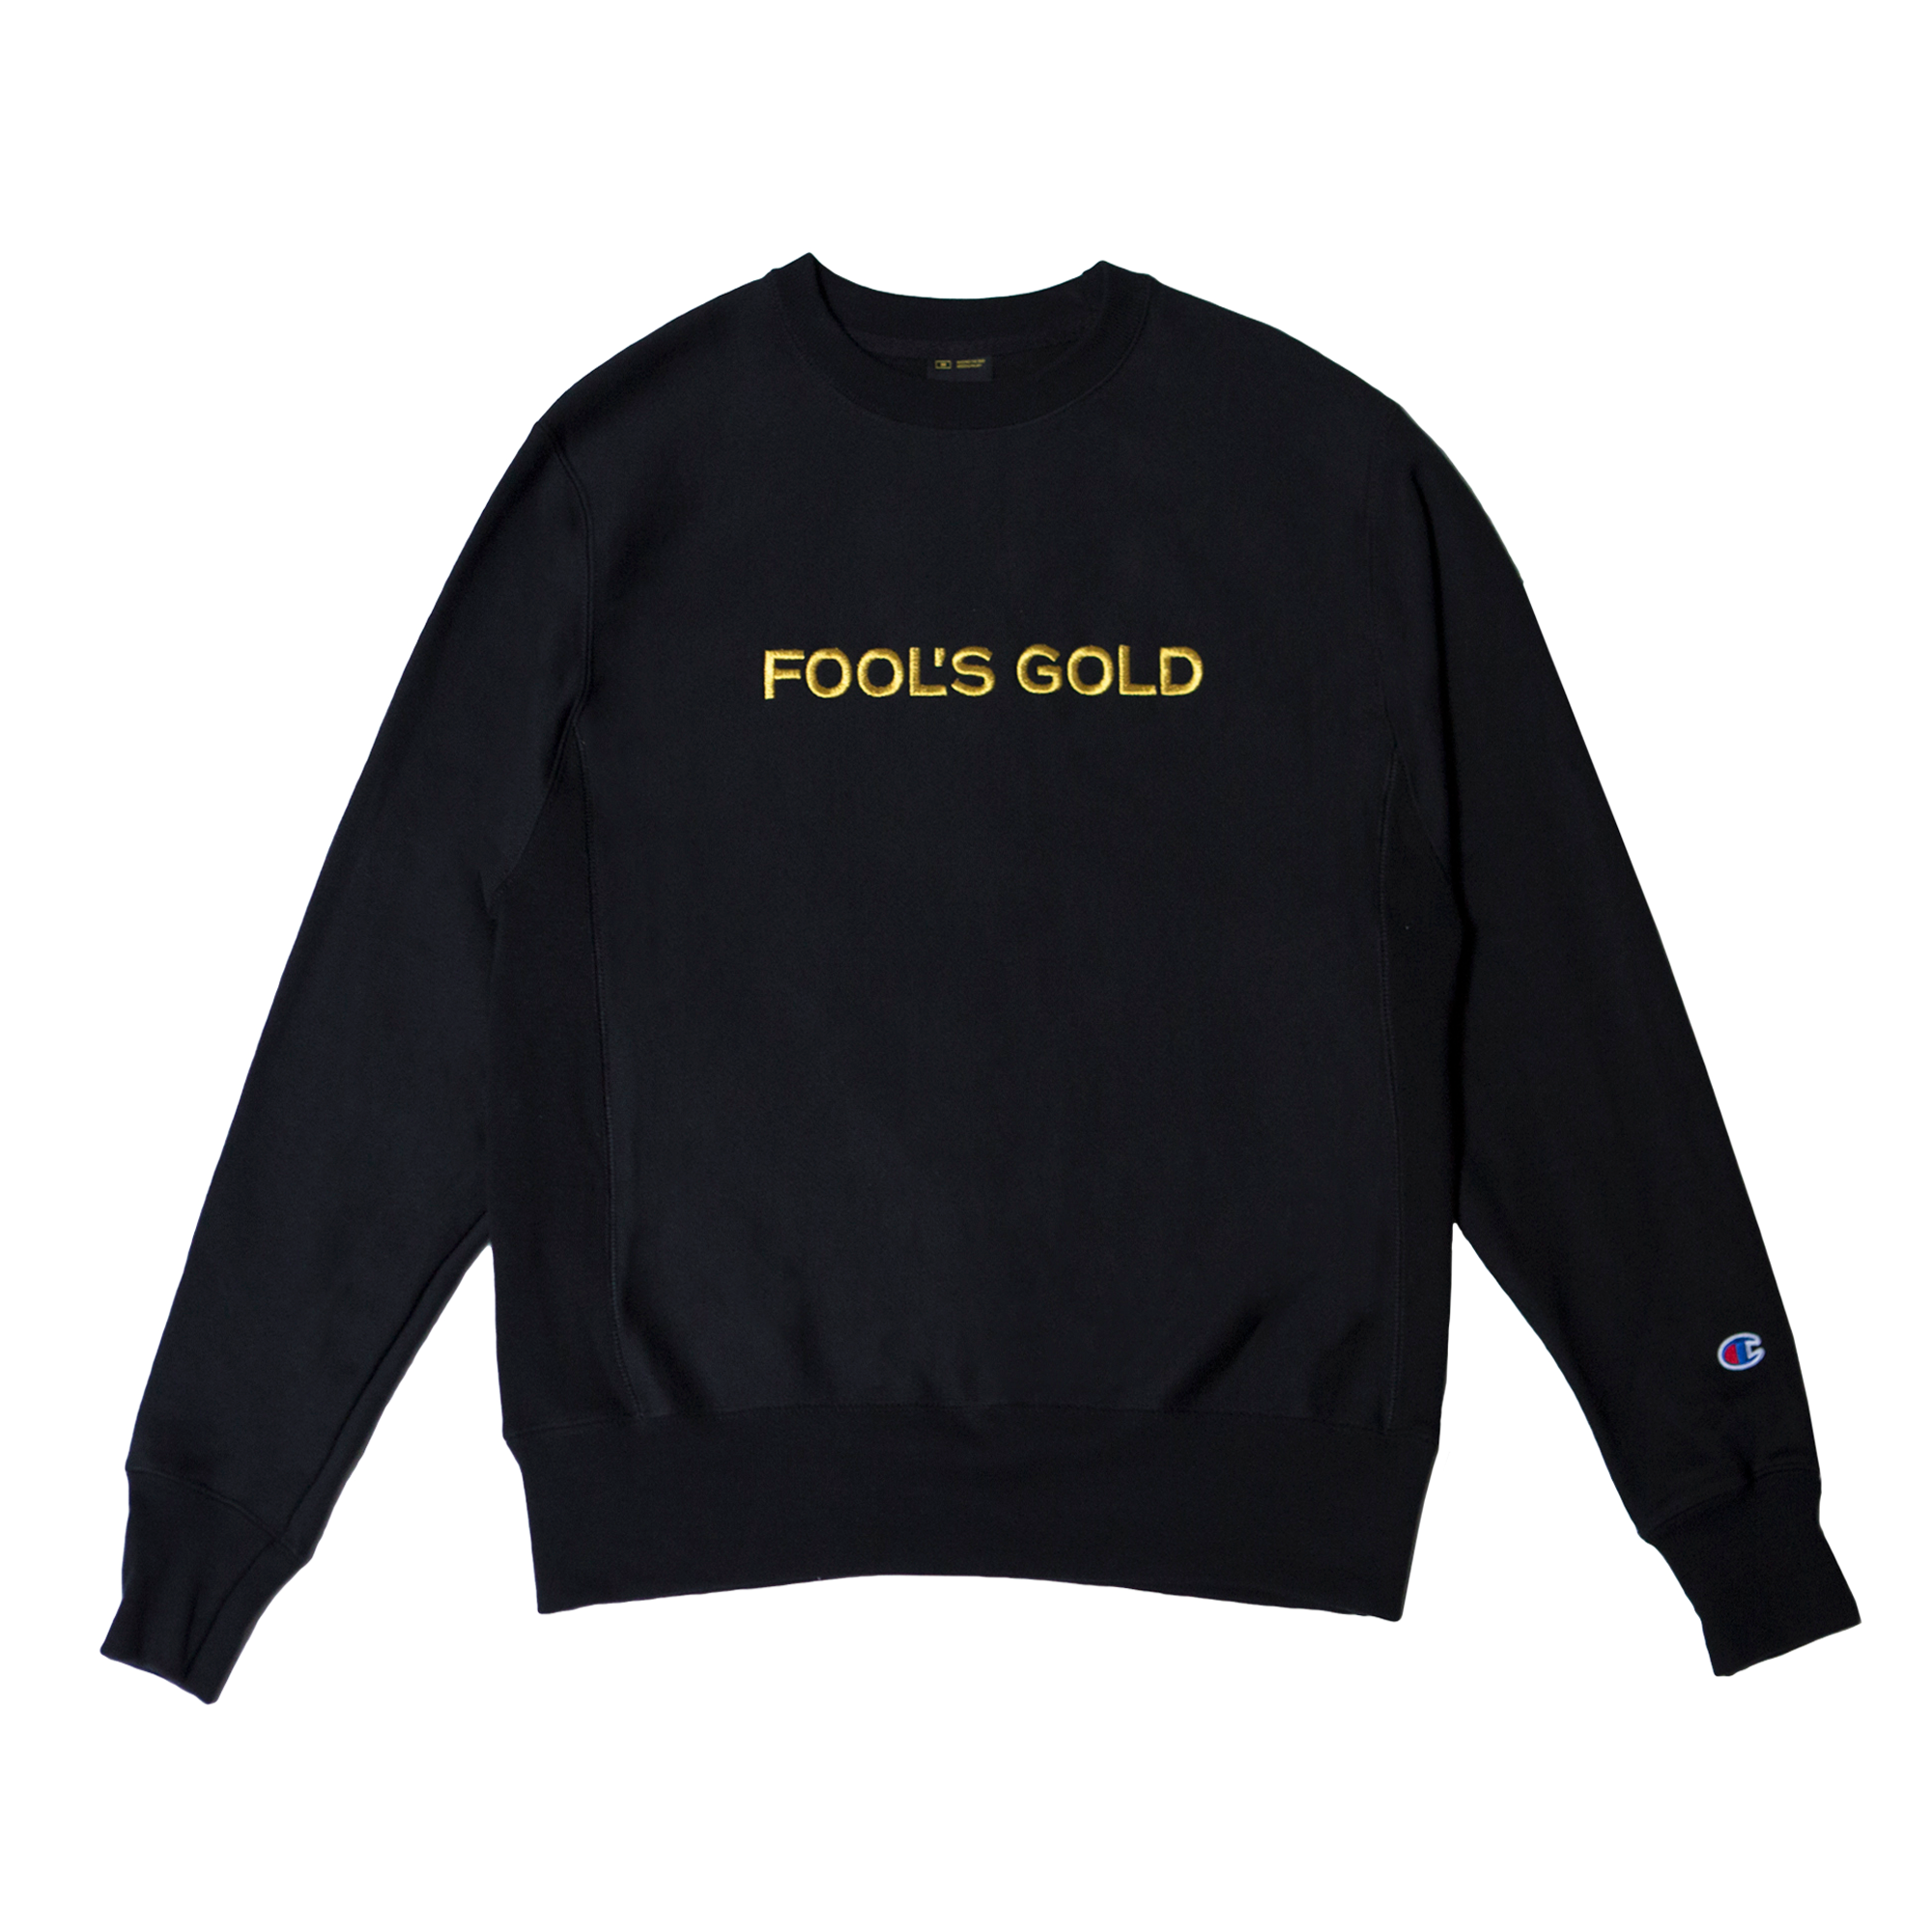 Fool’s Gold “Spell Out” Champion Crewneck